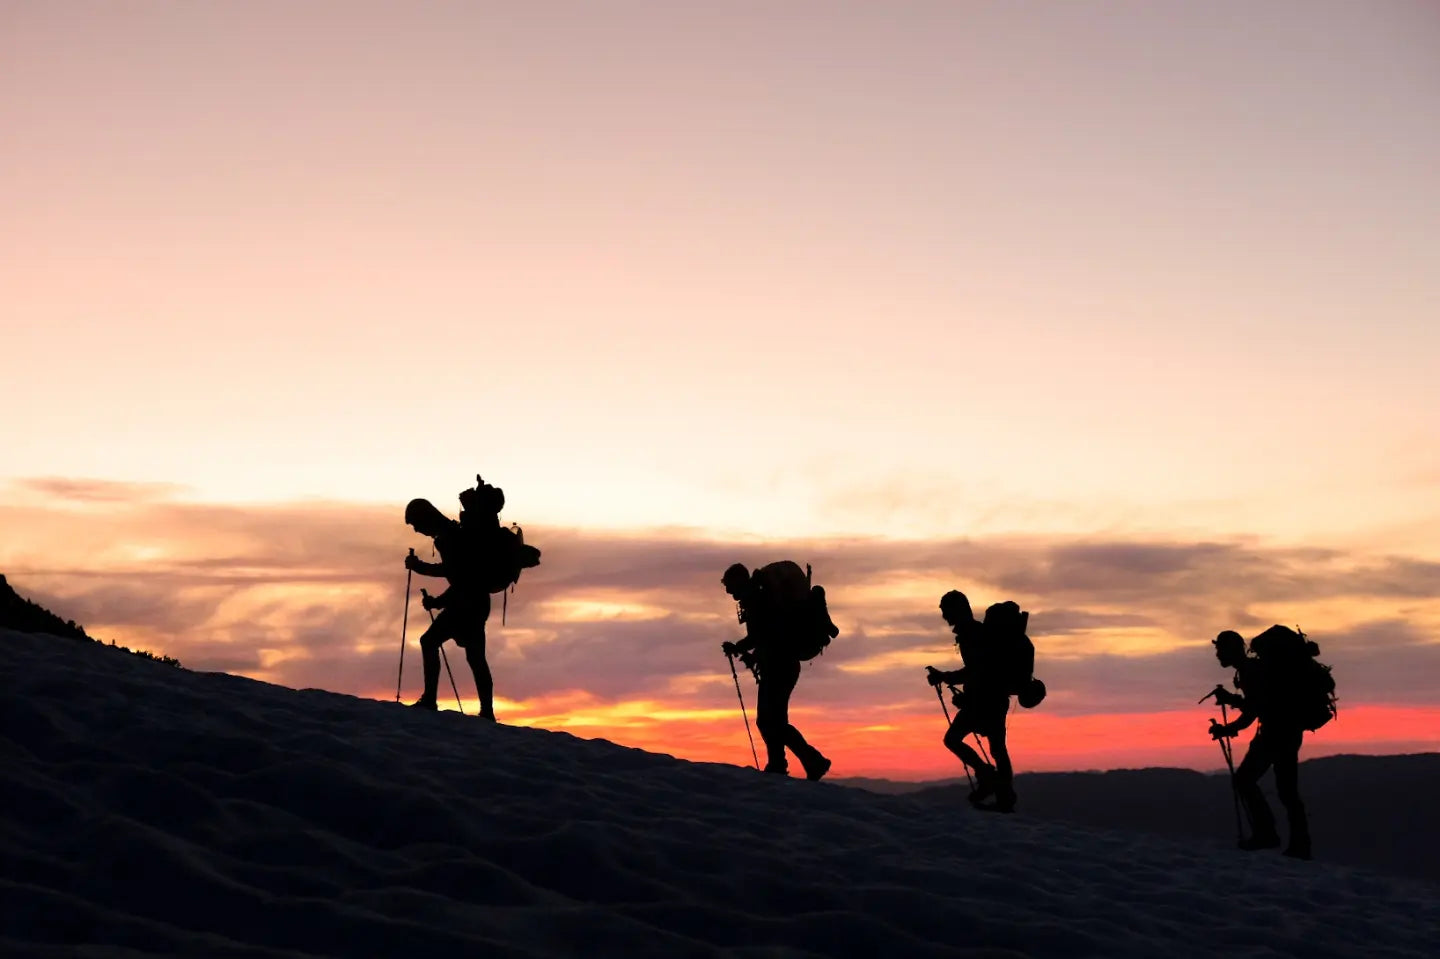 Silhouettes of four backpackers hiking up a hill at sunrise